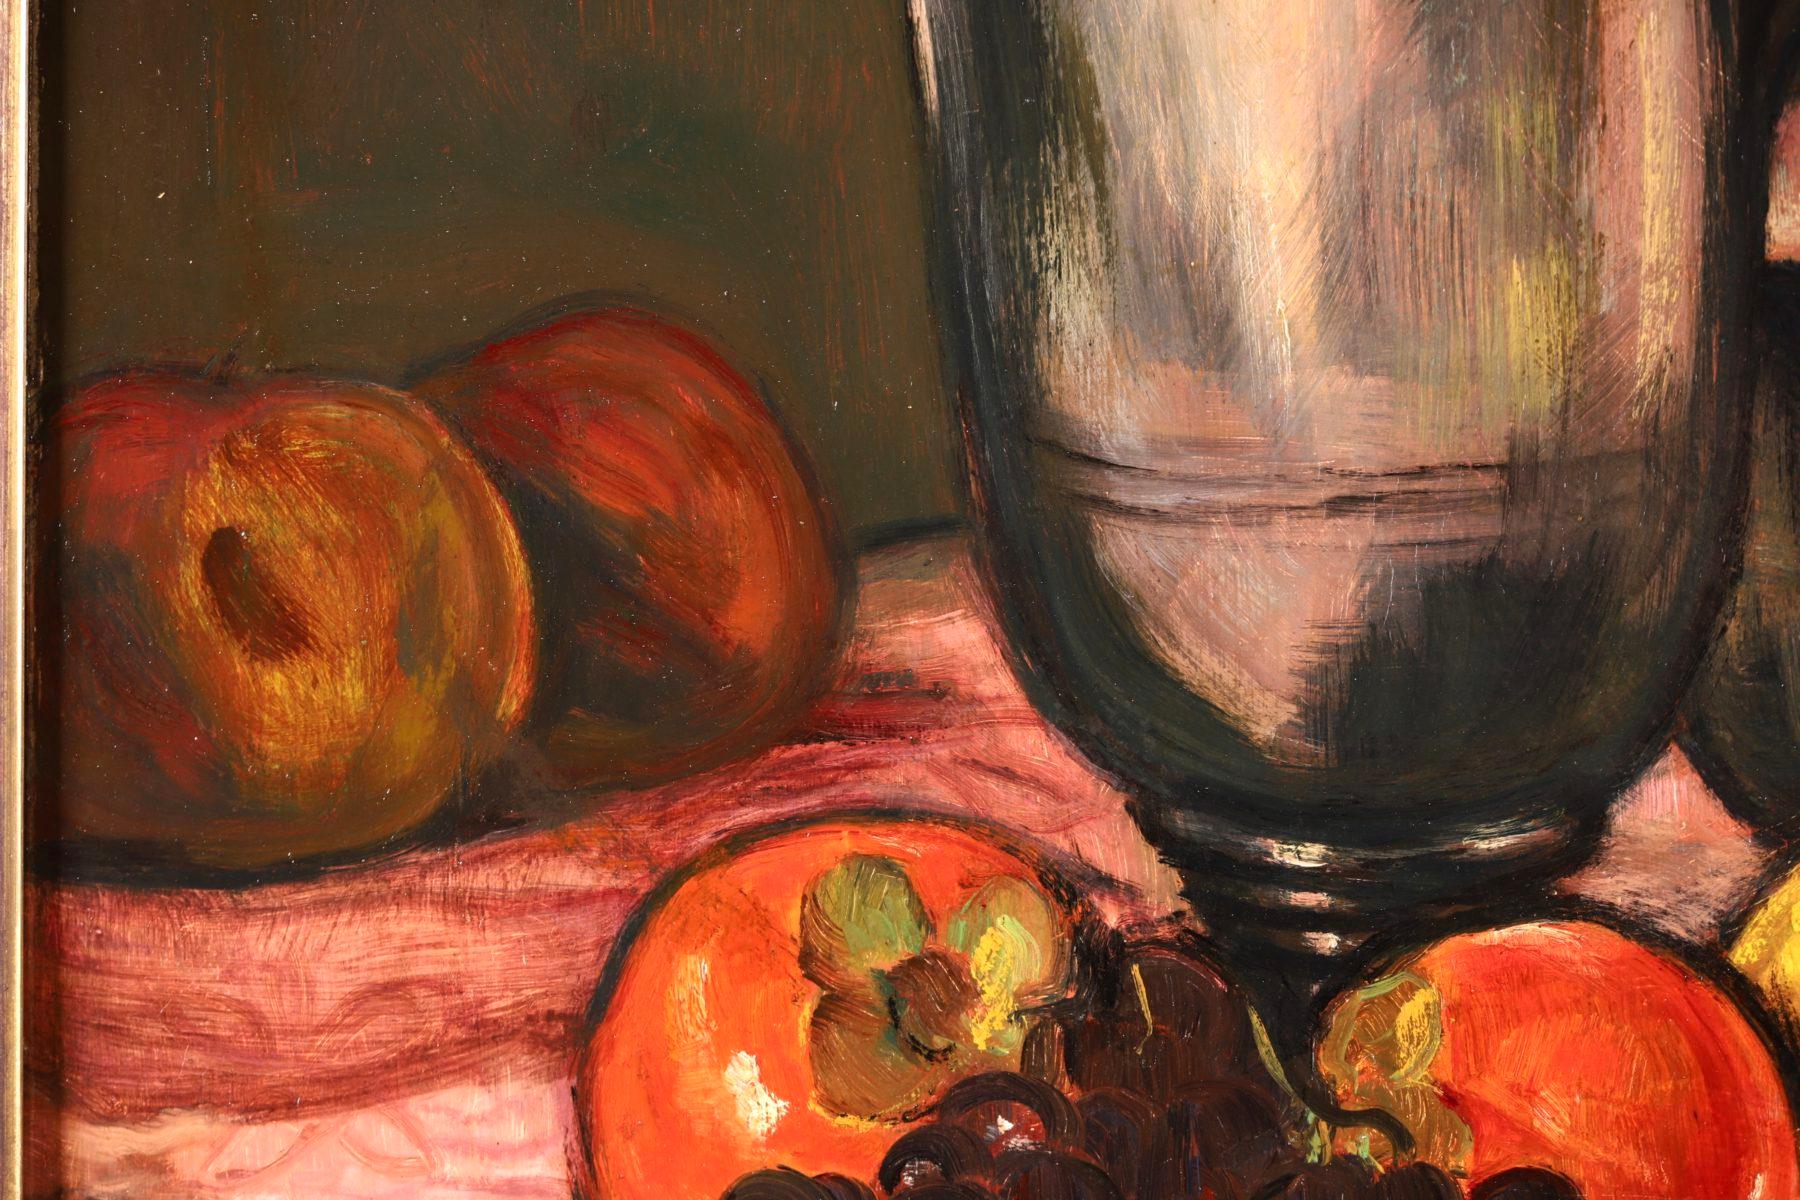 A wonderful oil on panel by French post impressionist painter Emile Bernard depicting persimmon, lemons and red grapes on a red patterned table cloth beside a pewter jug and cup. 

Signature:
Signed upper left

Dimensions:
Framed: 27